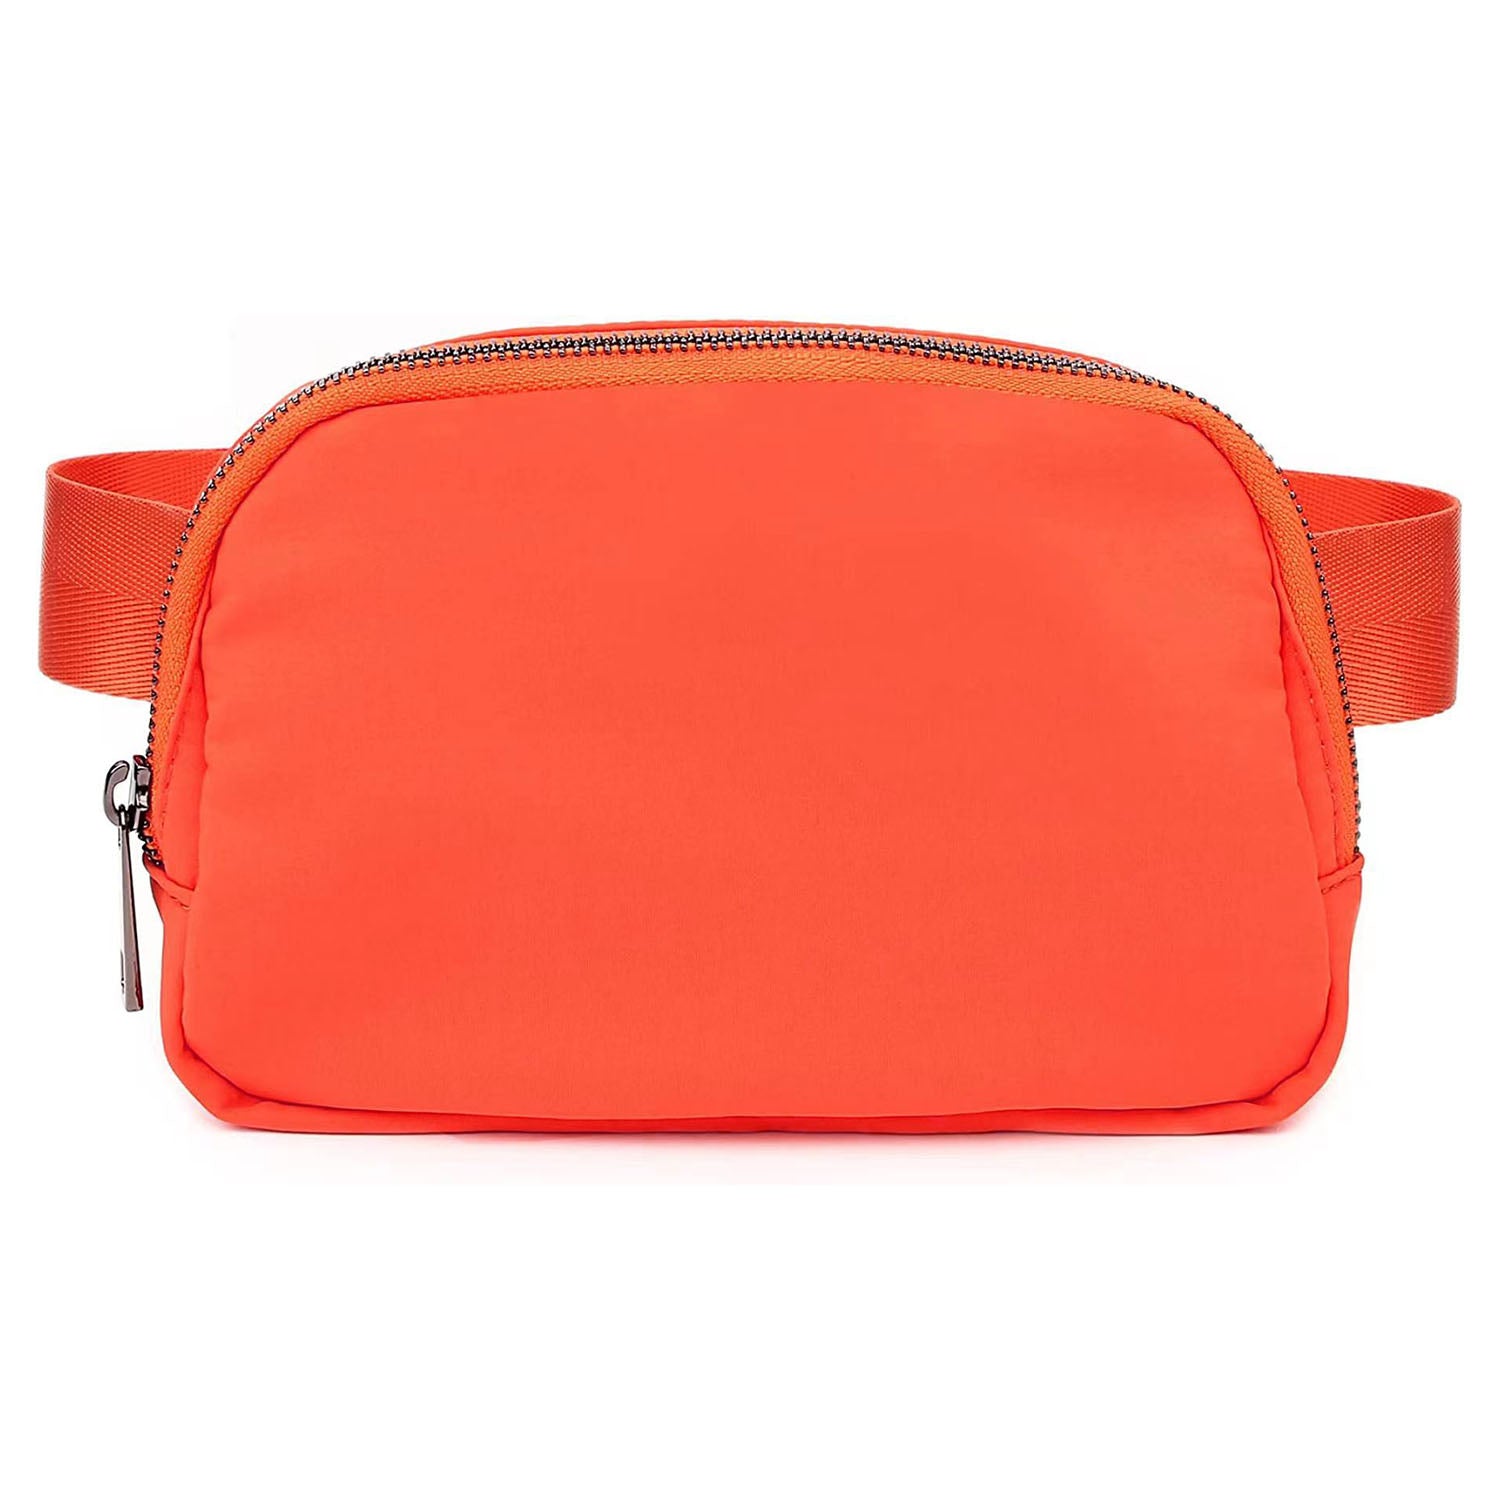 title:Sport Fanny Pack Unisex Waist Pouch Belt Bag Purse Chest Bag for Outdoor Sport Travel Beach Concerts Travel 20.86in-35.03in Waist Circumference with A;color:Orange